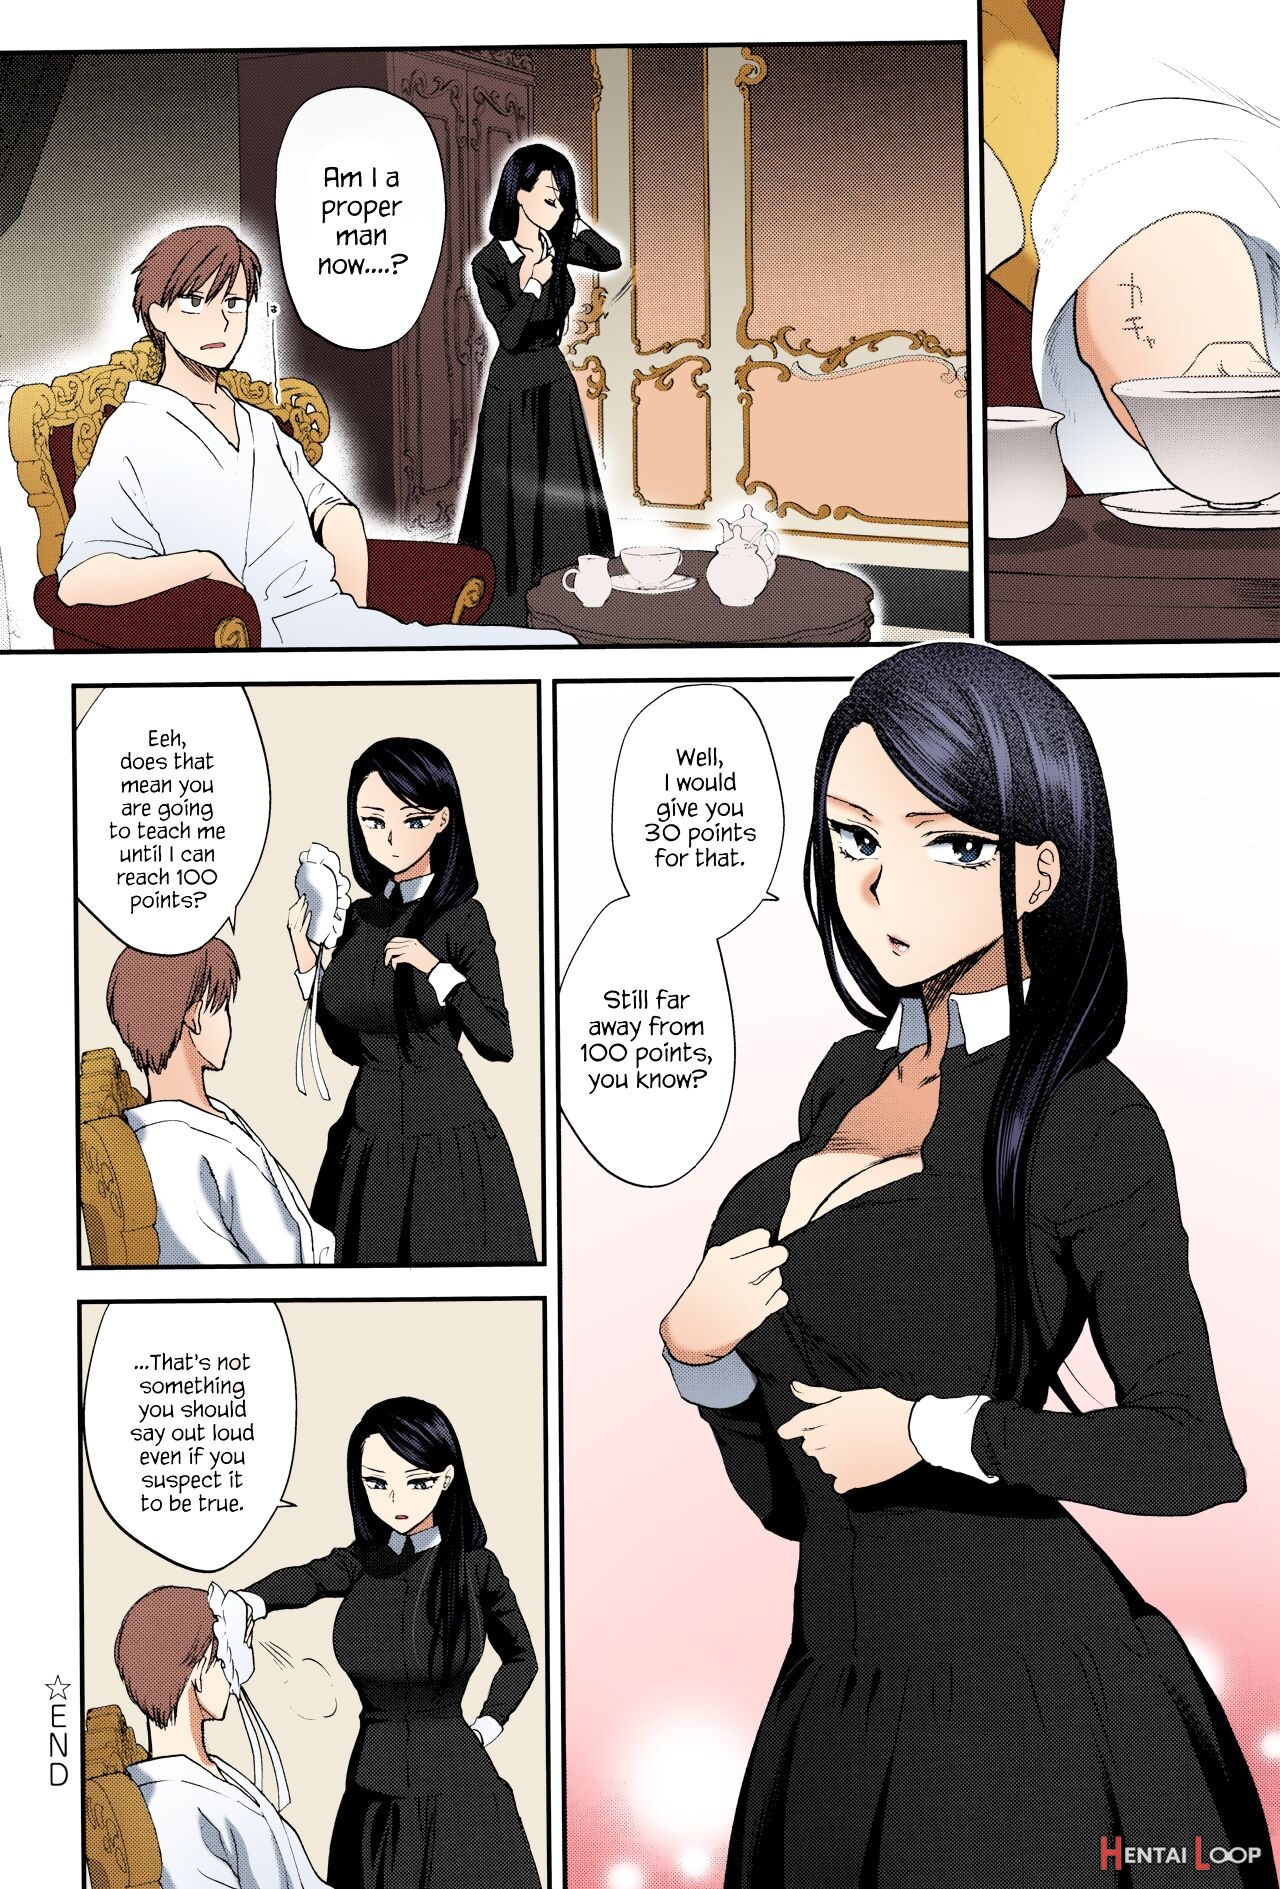 Kyoudou Well Maid - The Well “maid” Instructor page 24